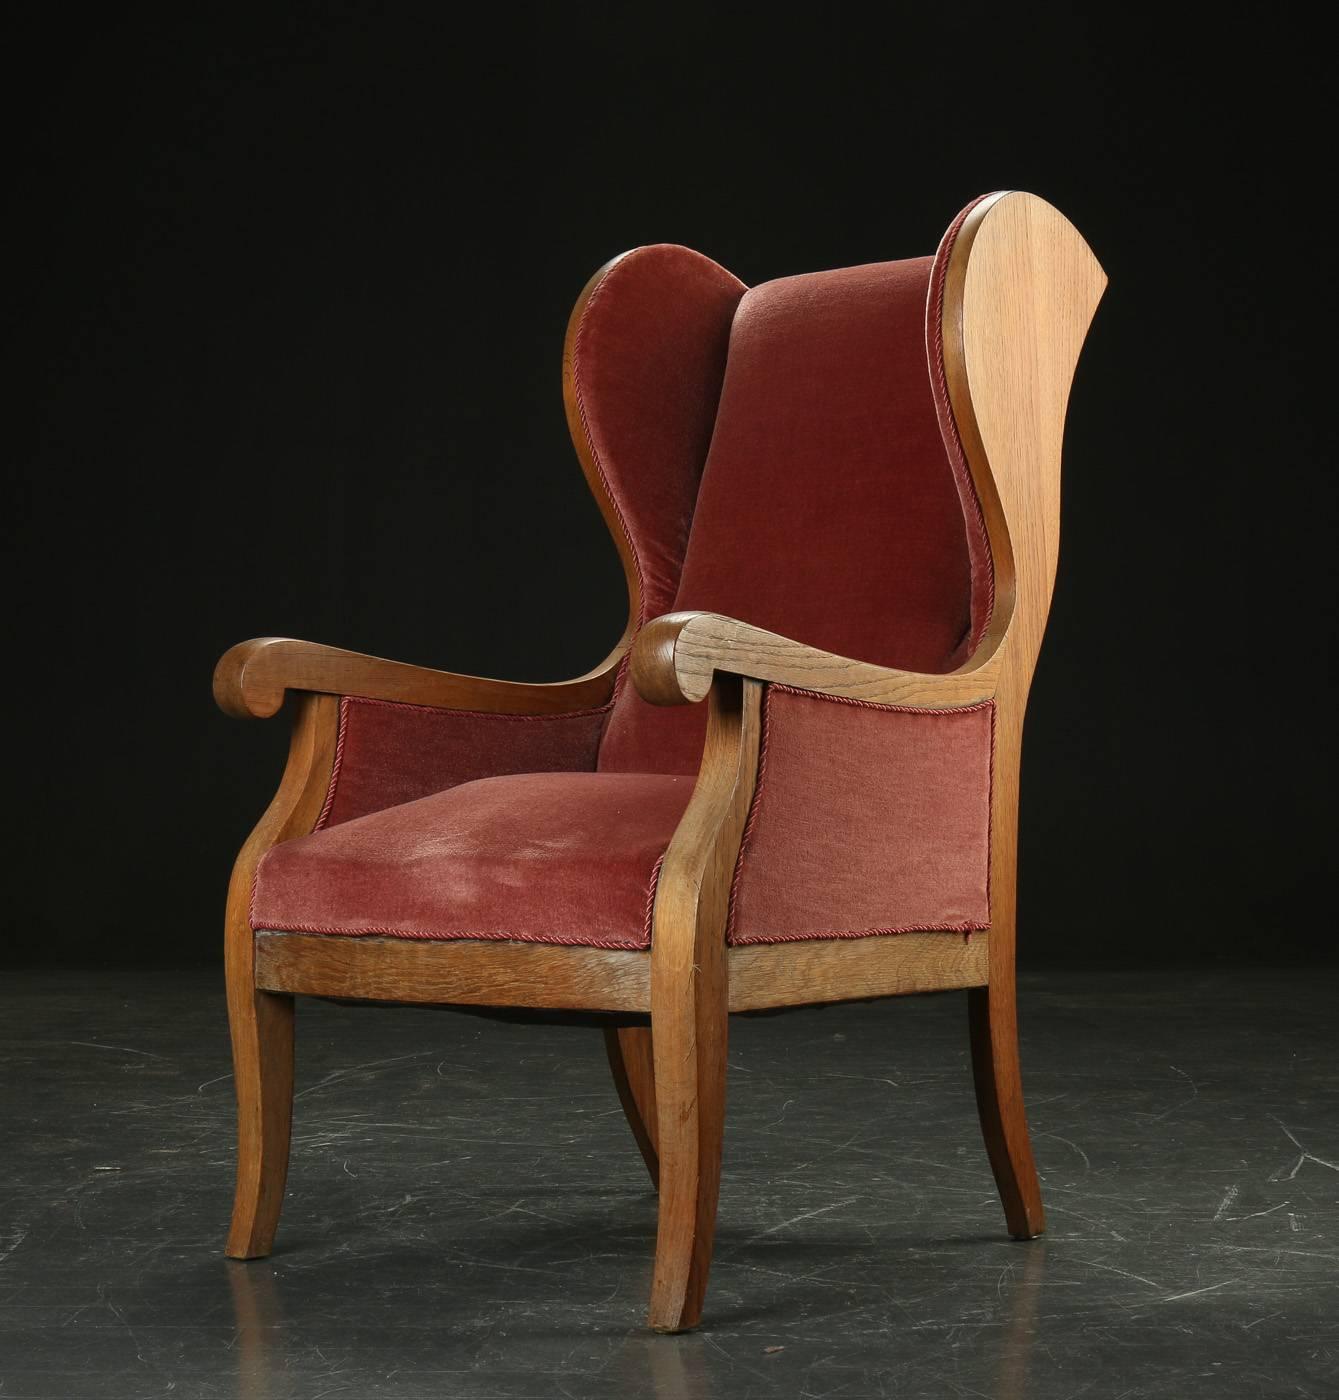 Sexy 1940s wingback armchair by Frits Henningsen with sweeping arms and curved headrests. Frame of oak. Velvet upholstery is elegant but shows its age.